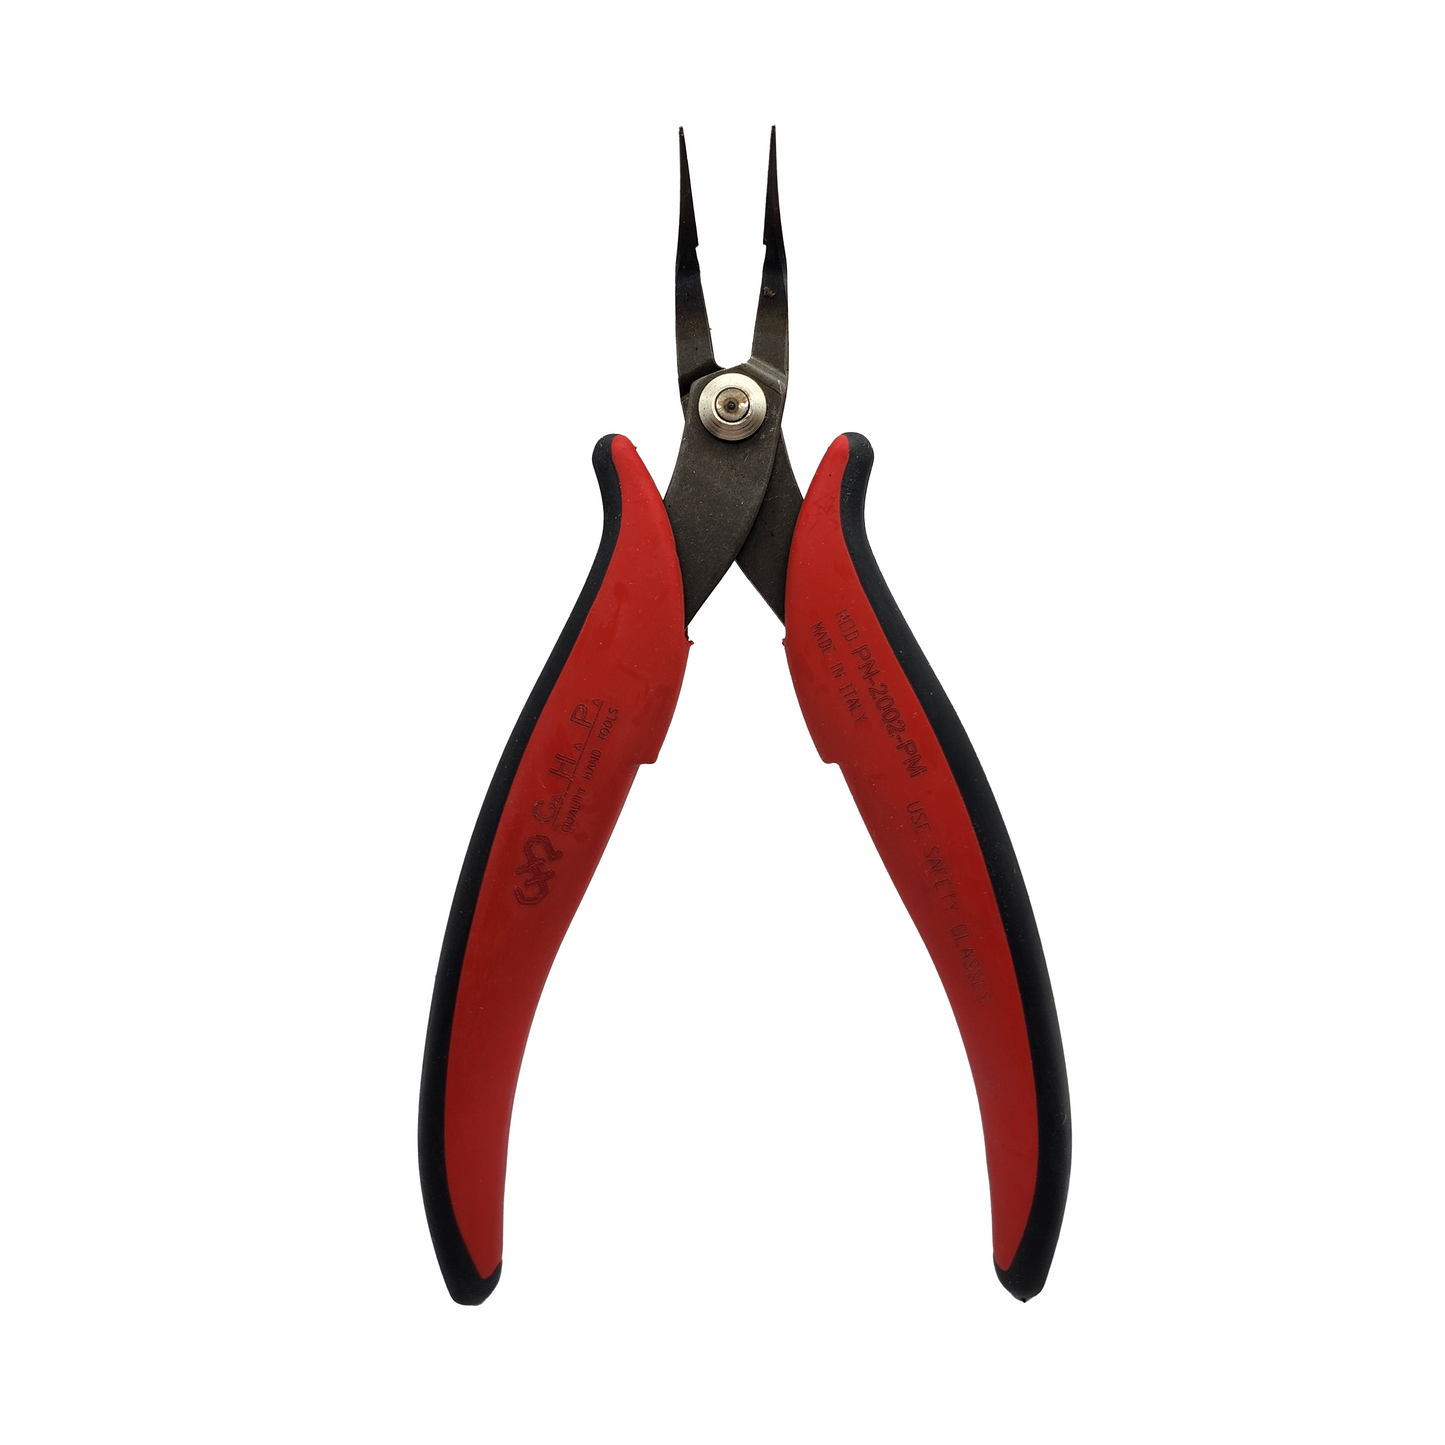 CHP_ CHP PN-2002-PM_ Cutters, Pliers, Multi-Tools_ Hakko Products